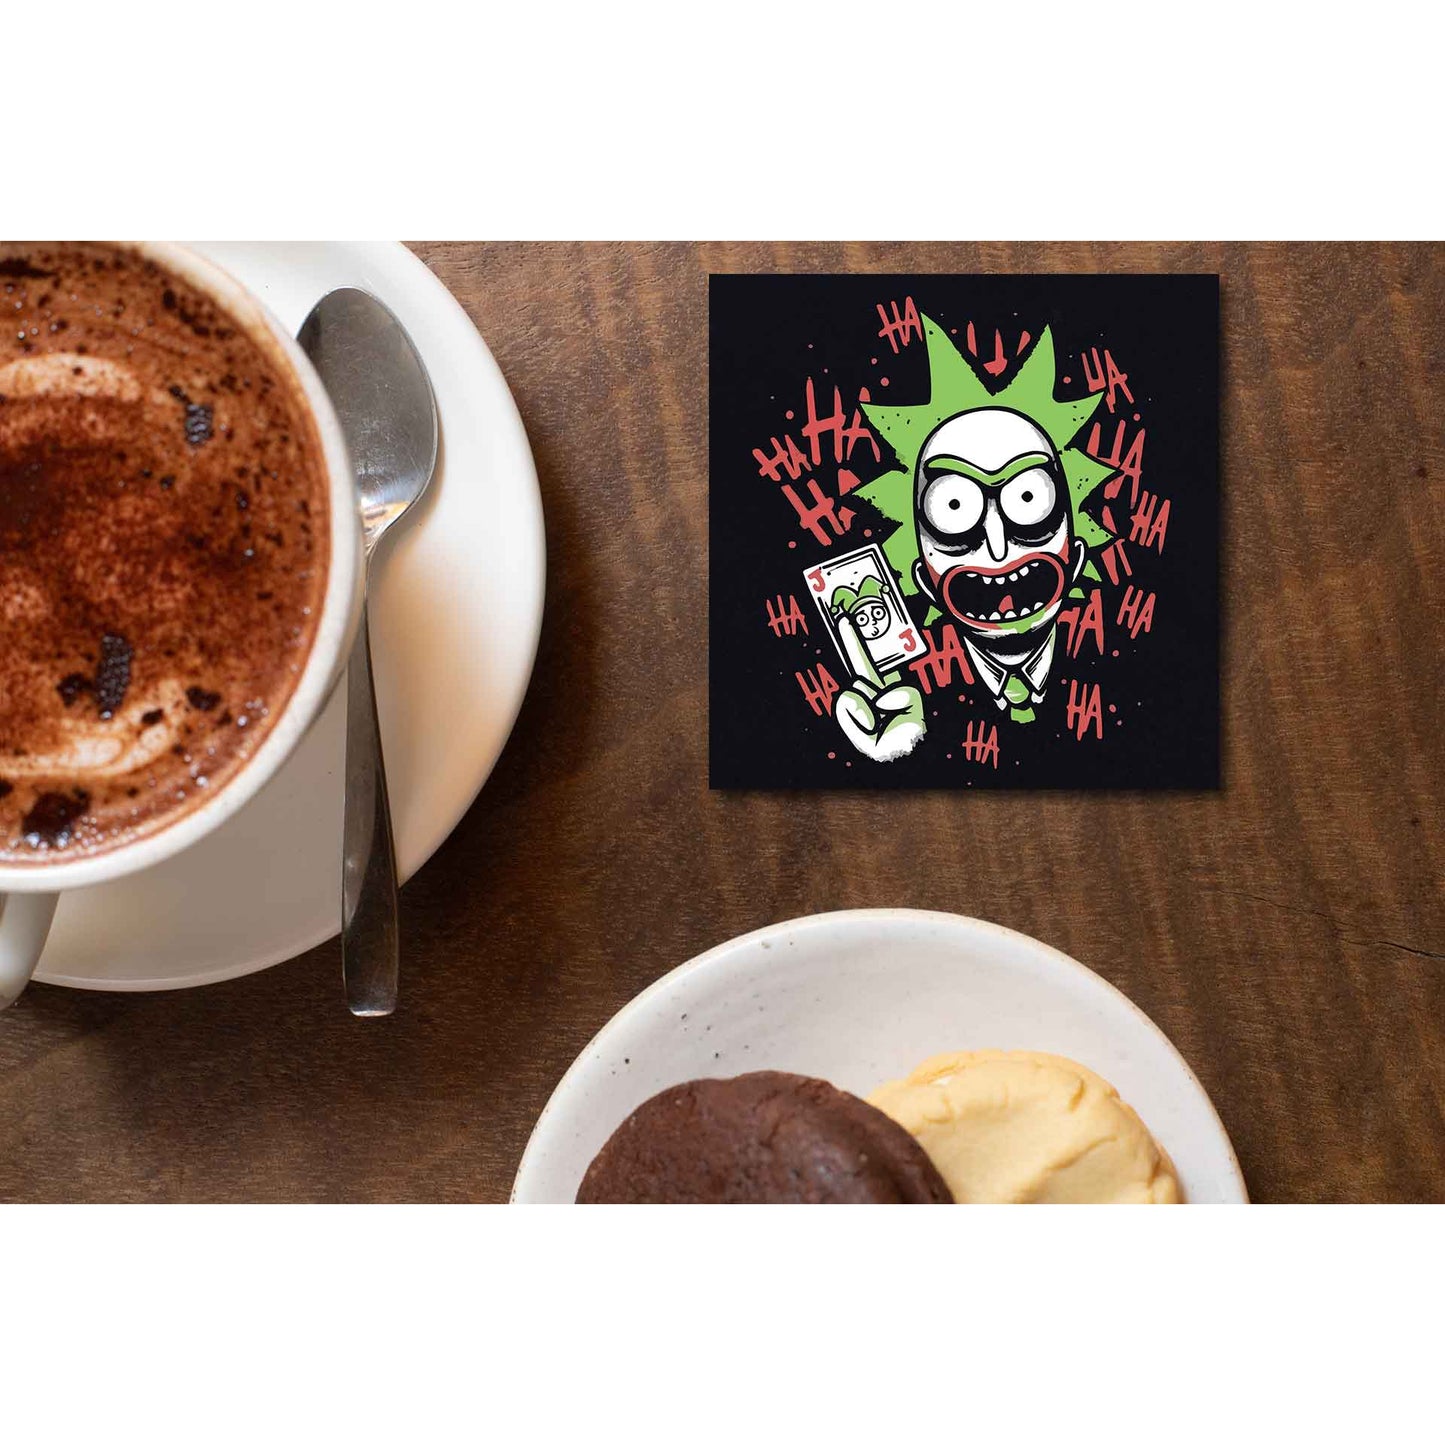 rick and morty joker coasters wooden table cups indian buy online india the banyan tee tbt men women girls boys unisex  rick and morty online summer beth mr meeseeks jerry quote vector art clothing accessories merchandise